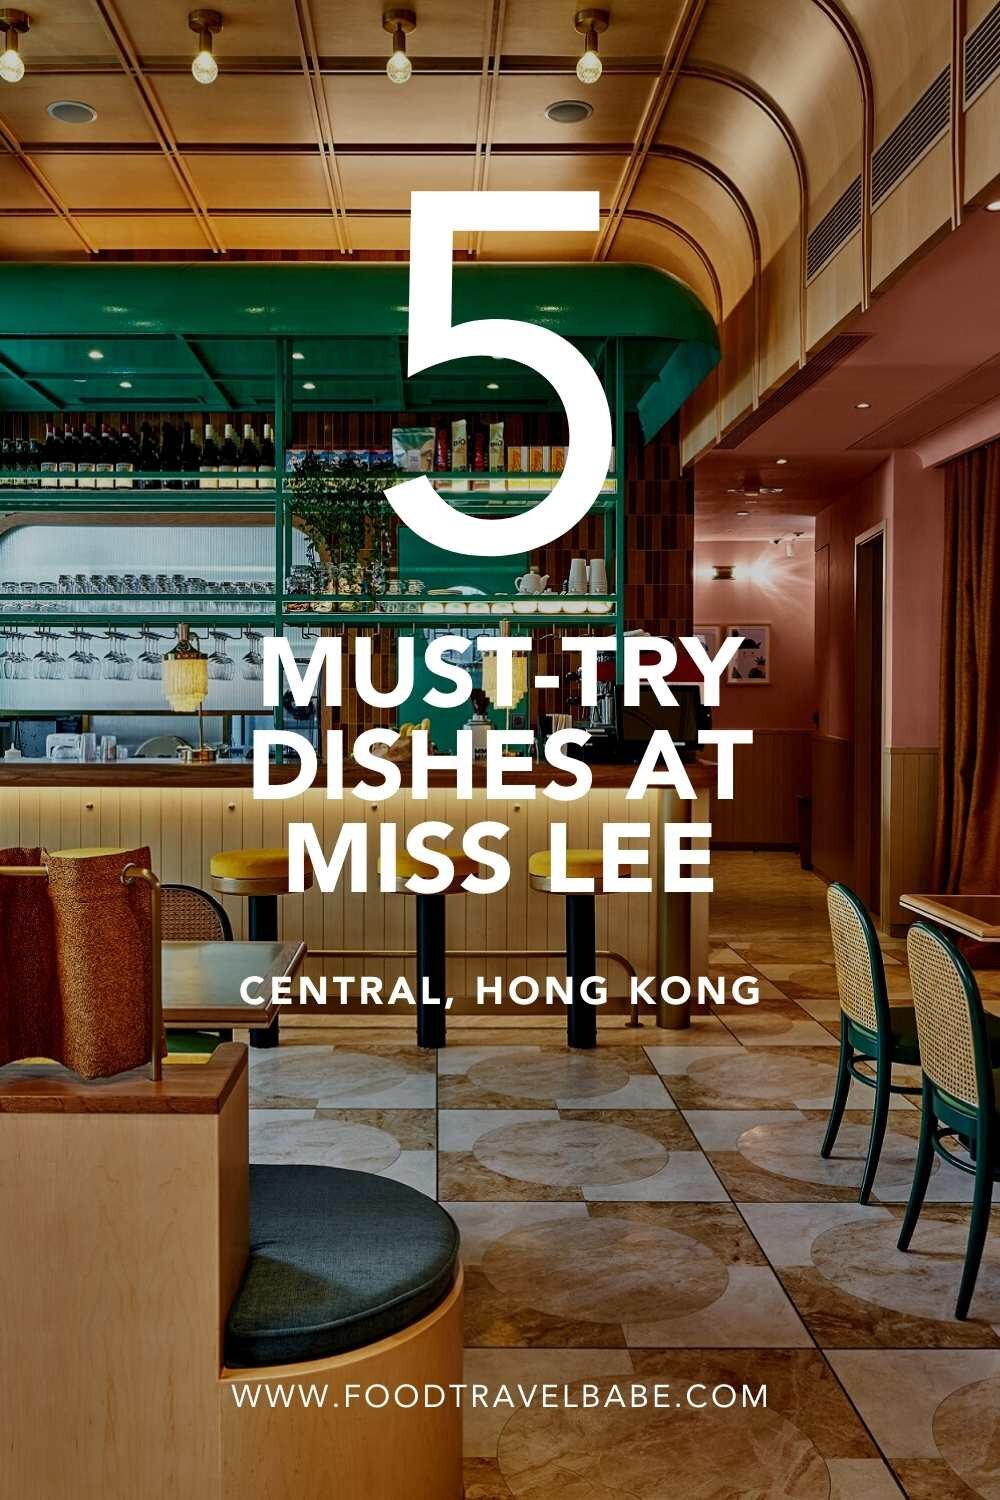 FOODTRAVELBABE 5 MUST TRY DISHES AT MISS LEE.jpg